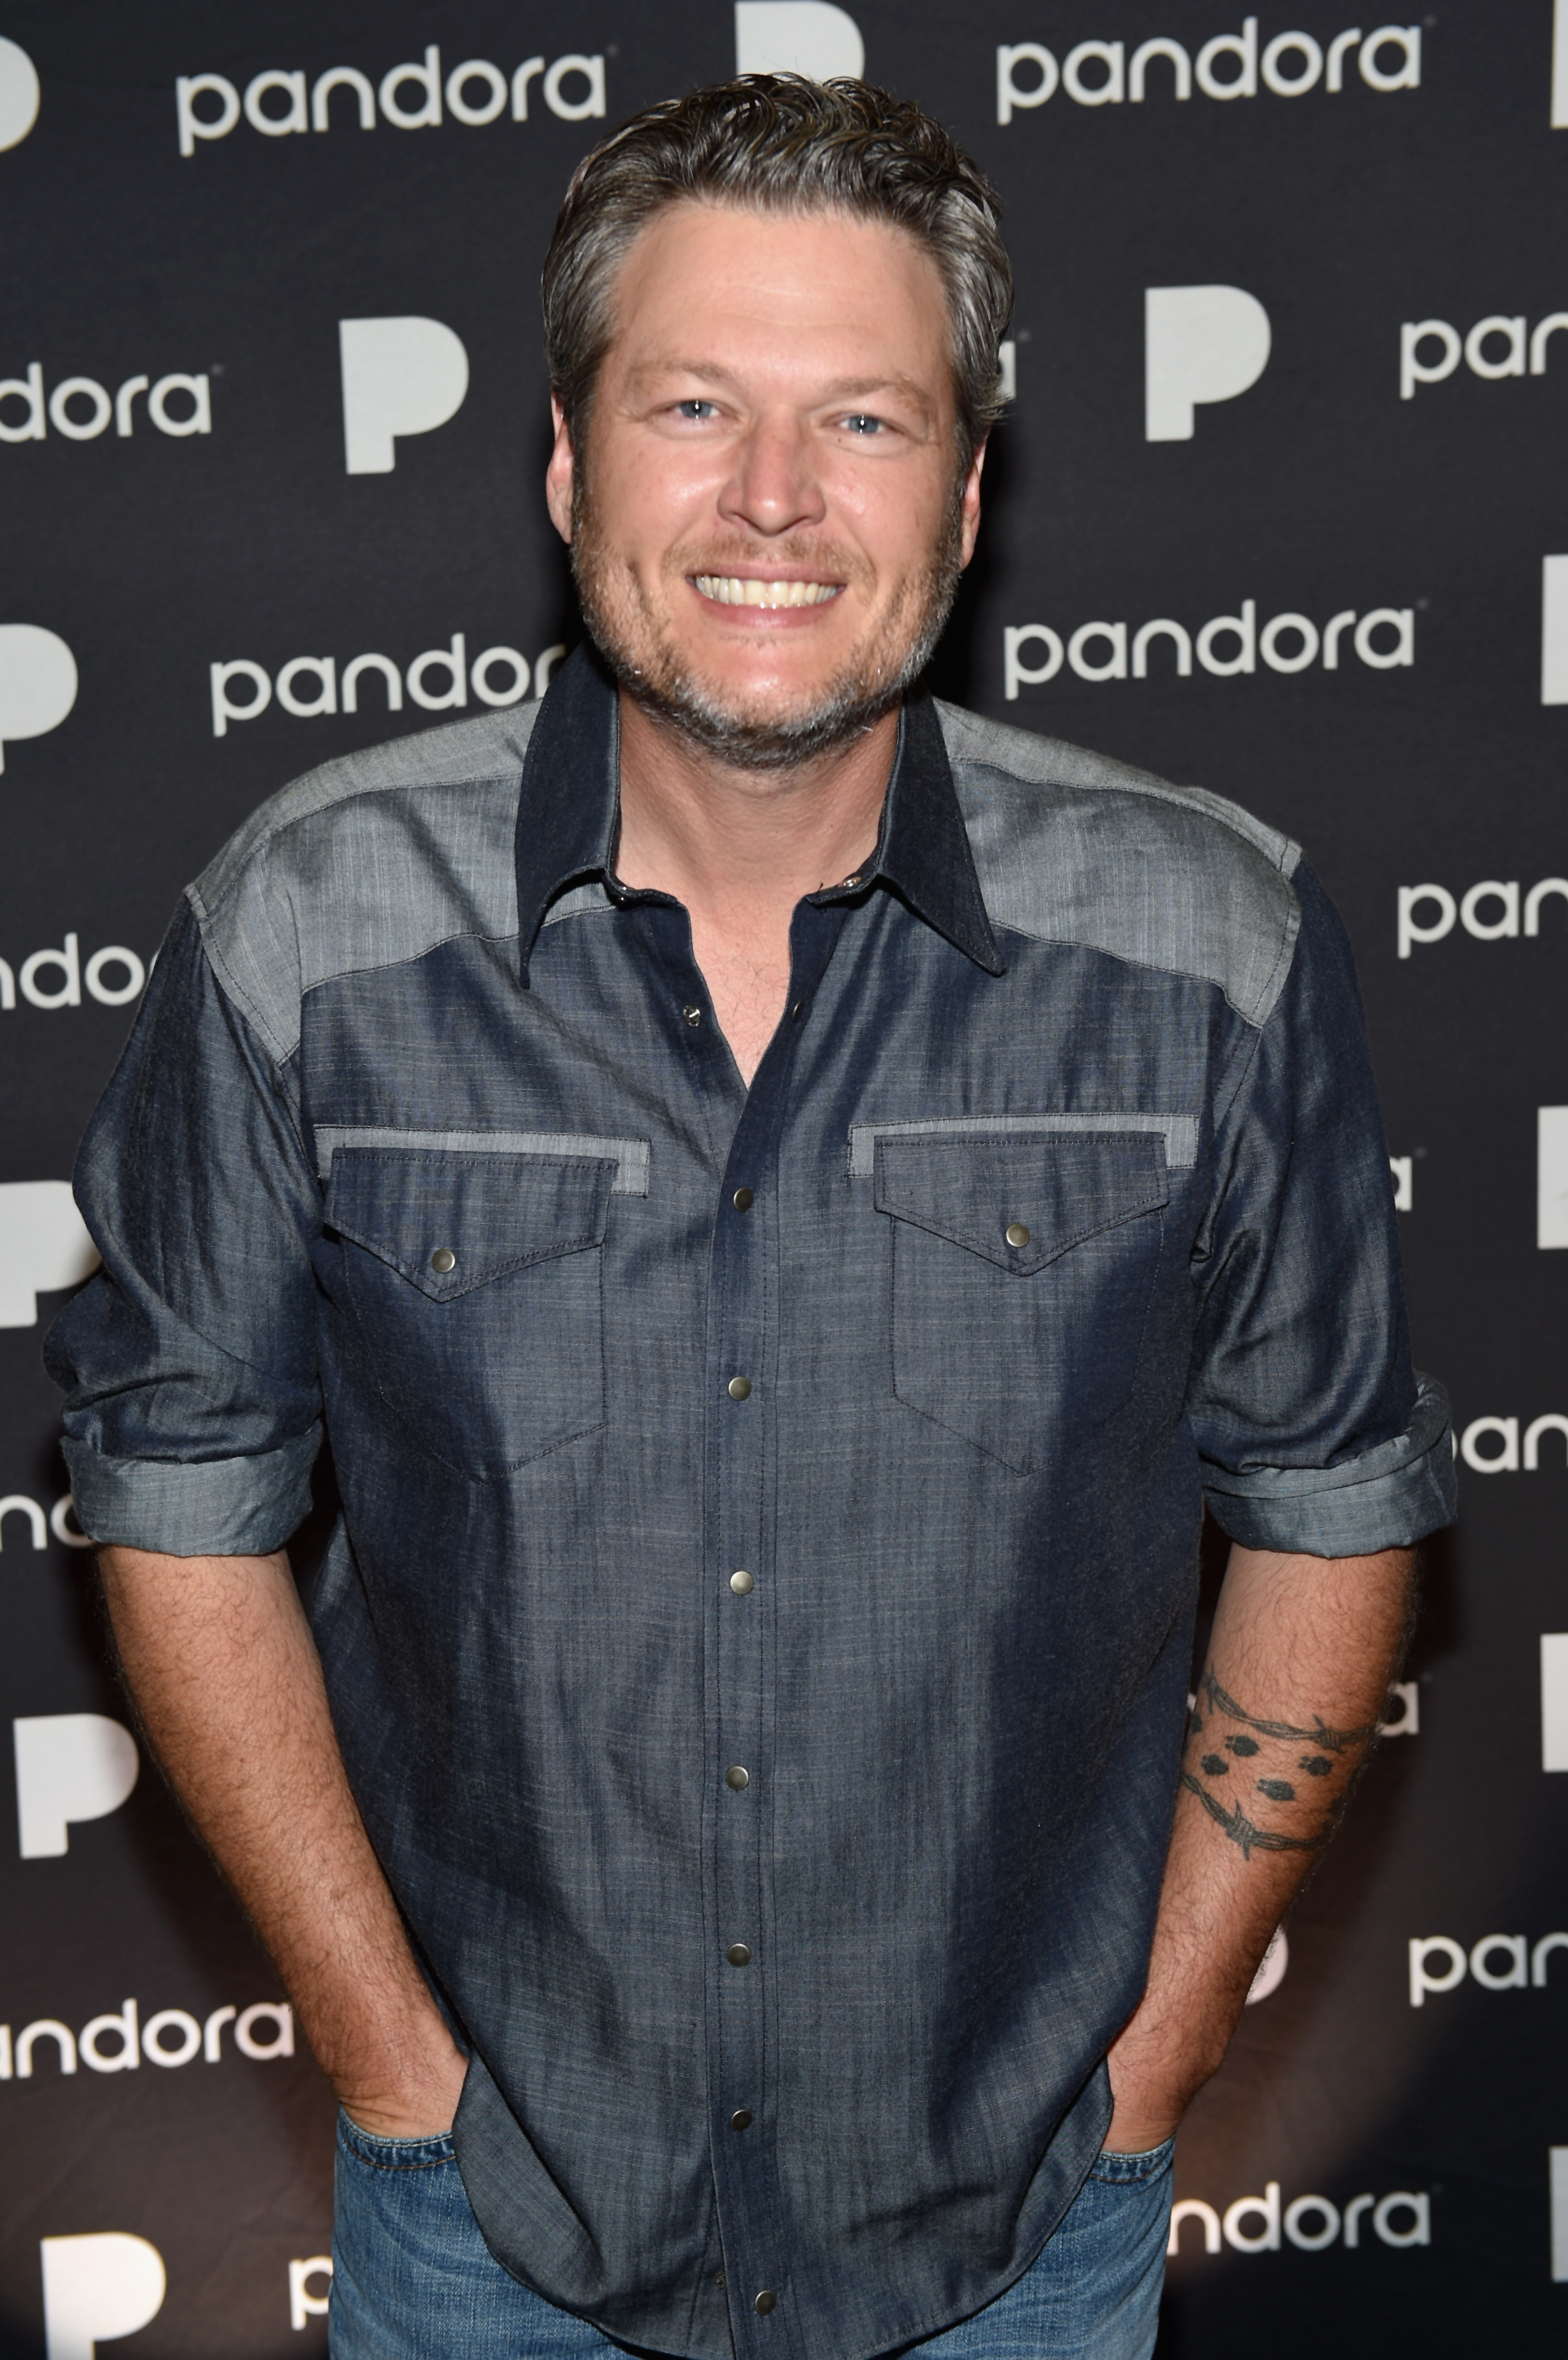 Blake Shelton at Pandora Sounds Like You: Country on November 3, 2017 in Nashville, Tennessee | Source: Getty Images